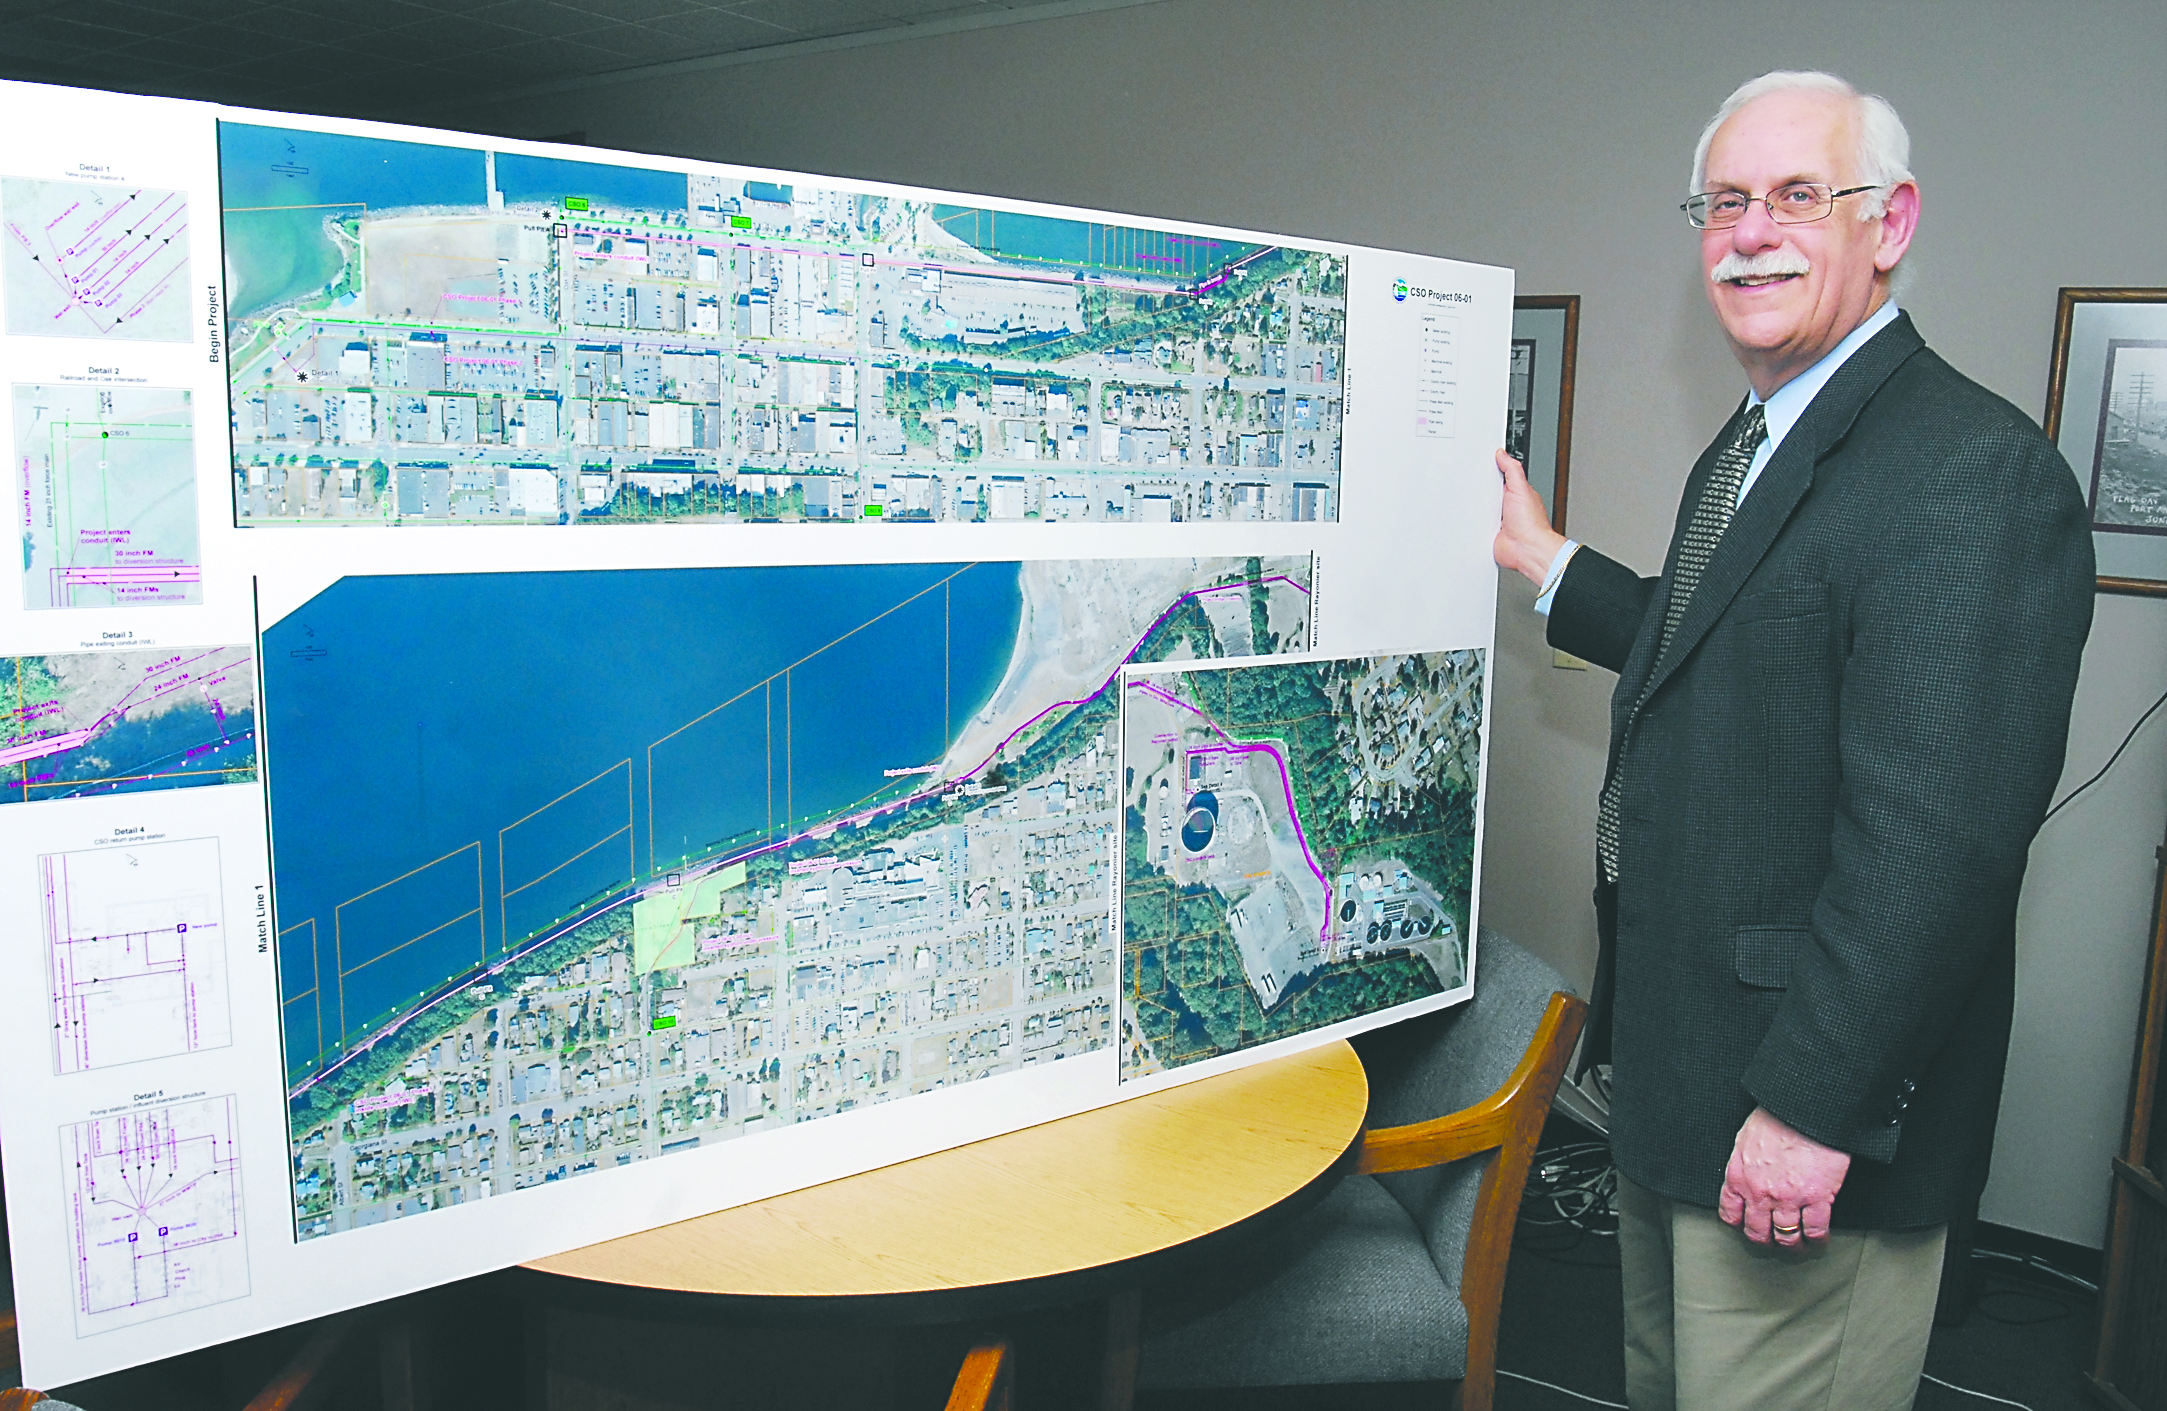 Public Works and Utilities Director Glenn Cutler stands with a display at City Hall showing an aerial schematic diagram of the city’s combined sewer outflow project